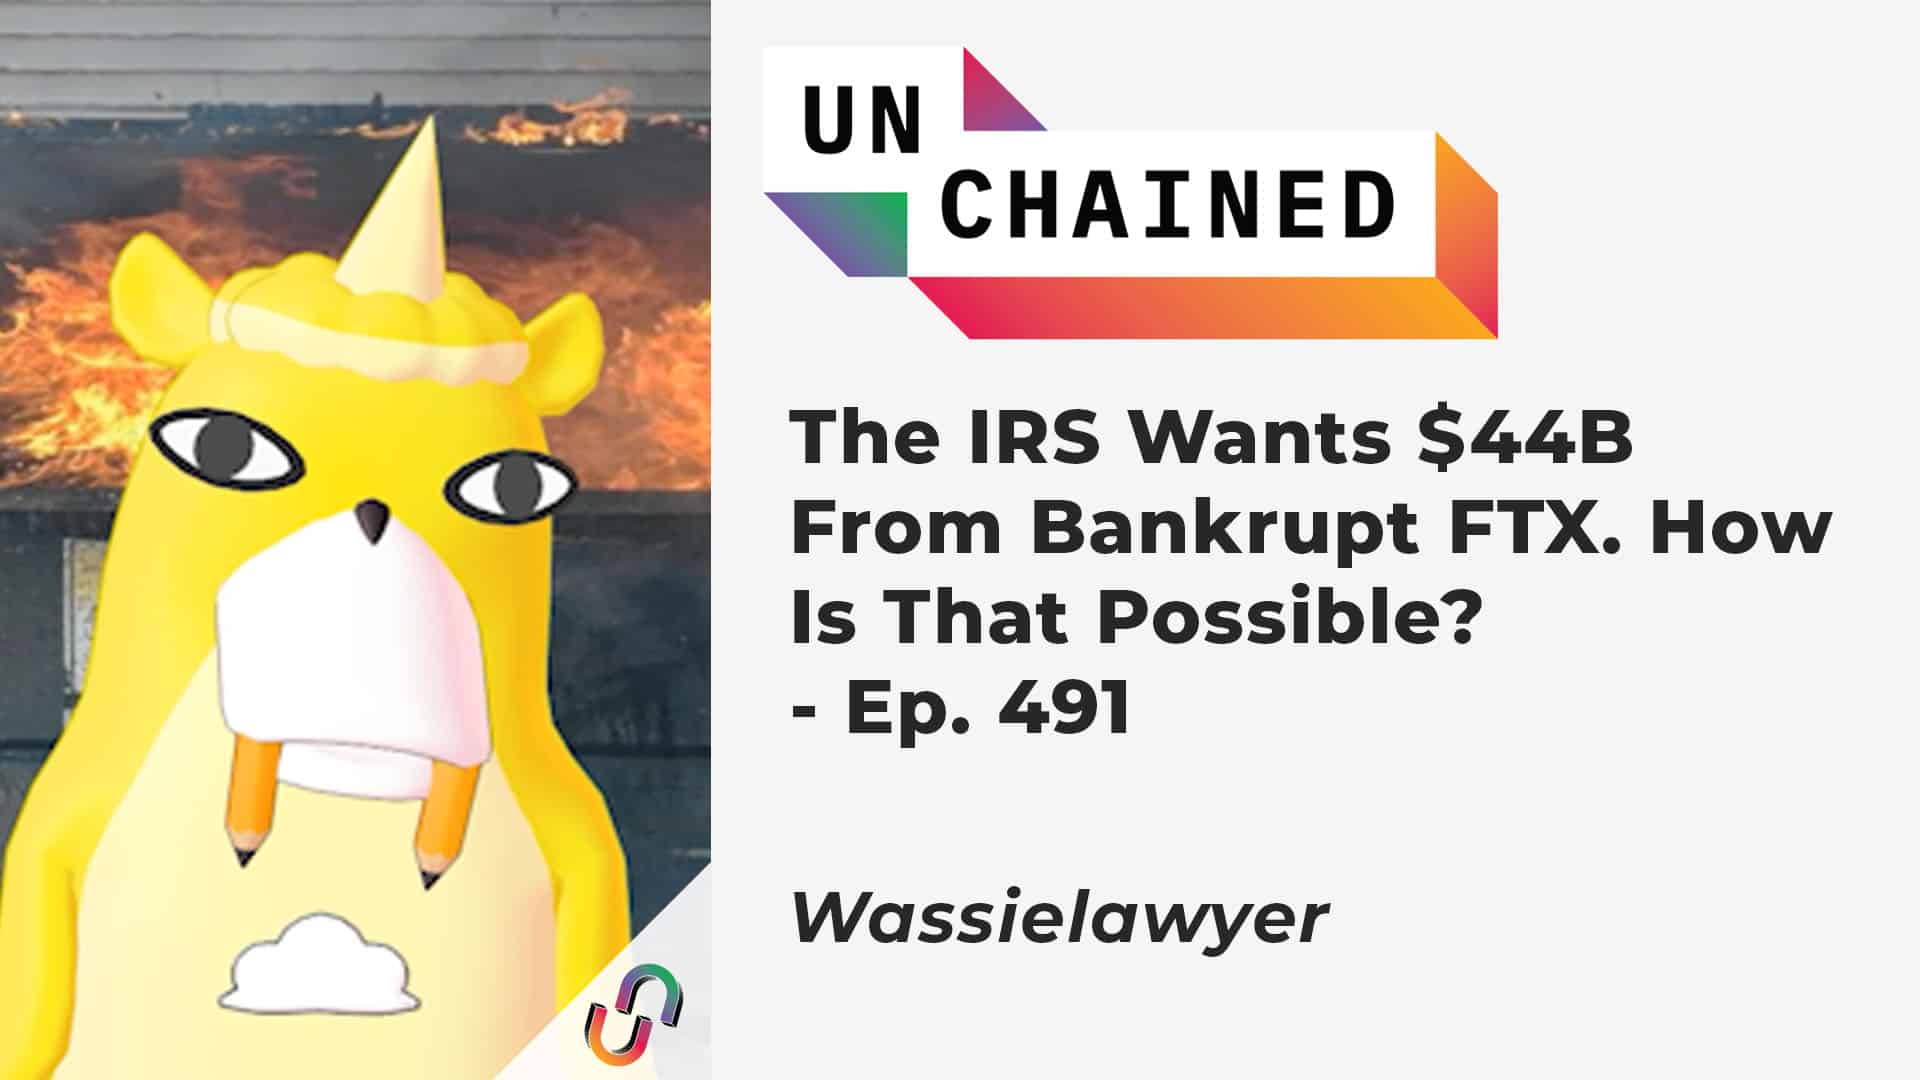 The IRS Wants $44B From Bankrupt FTX. How Is That Possible? - Ep. 491